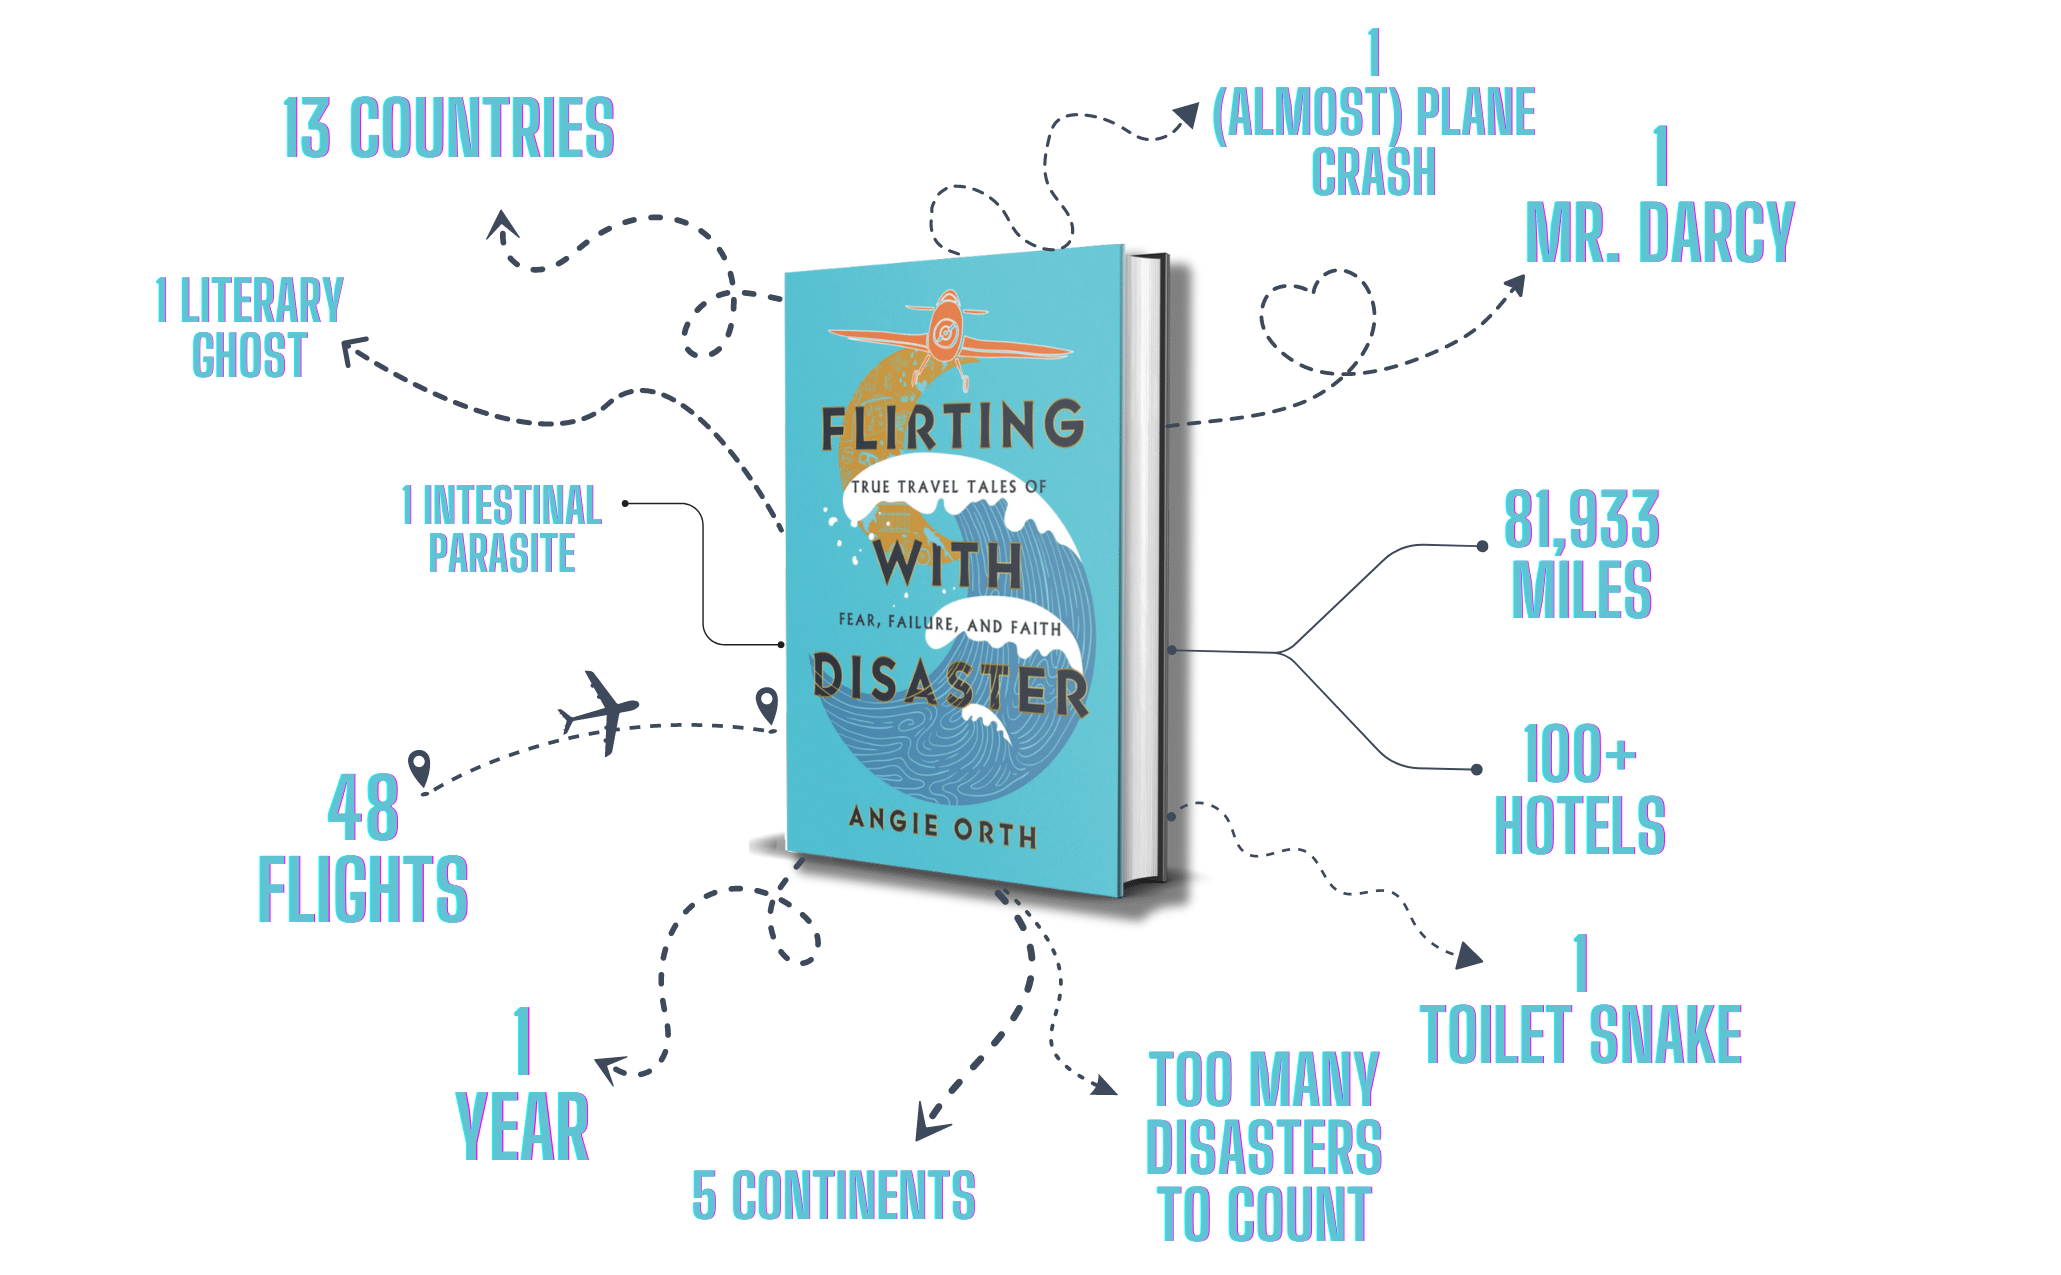 Flirting with Disaster by Angie Orth